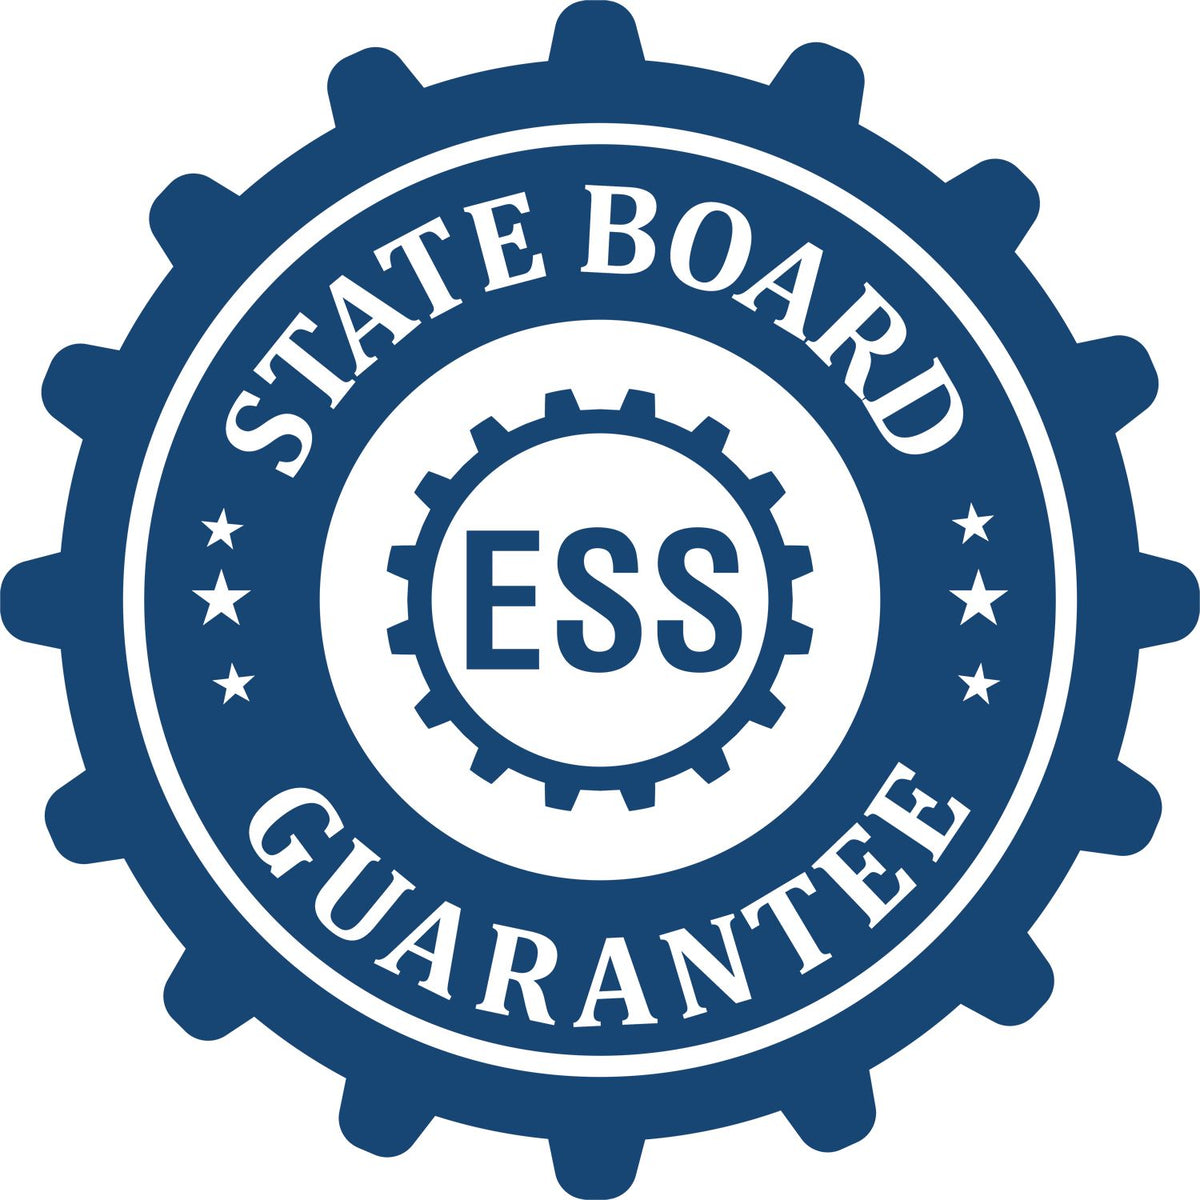 An emblem in a gear shape illustrating a state board guarantee for the Premium MaxLight Pre-Inked Connecticut Landscape Architectural Stamp product.